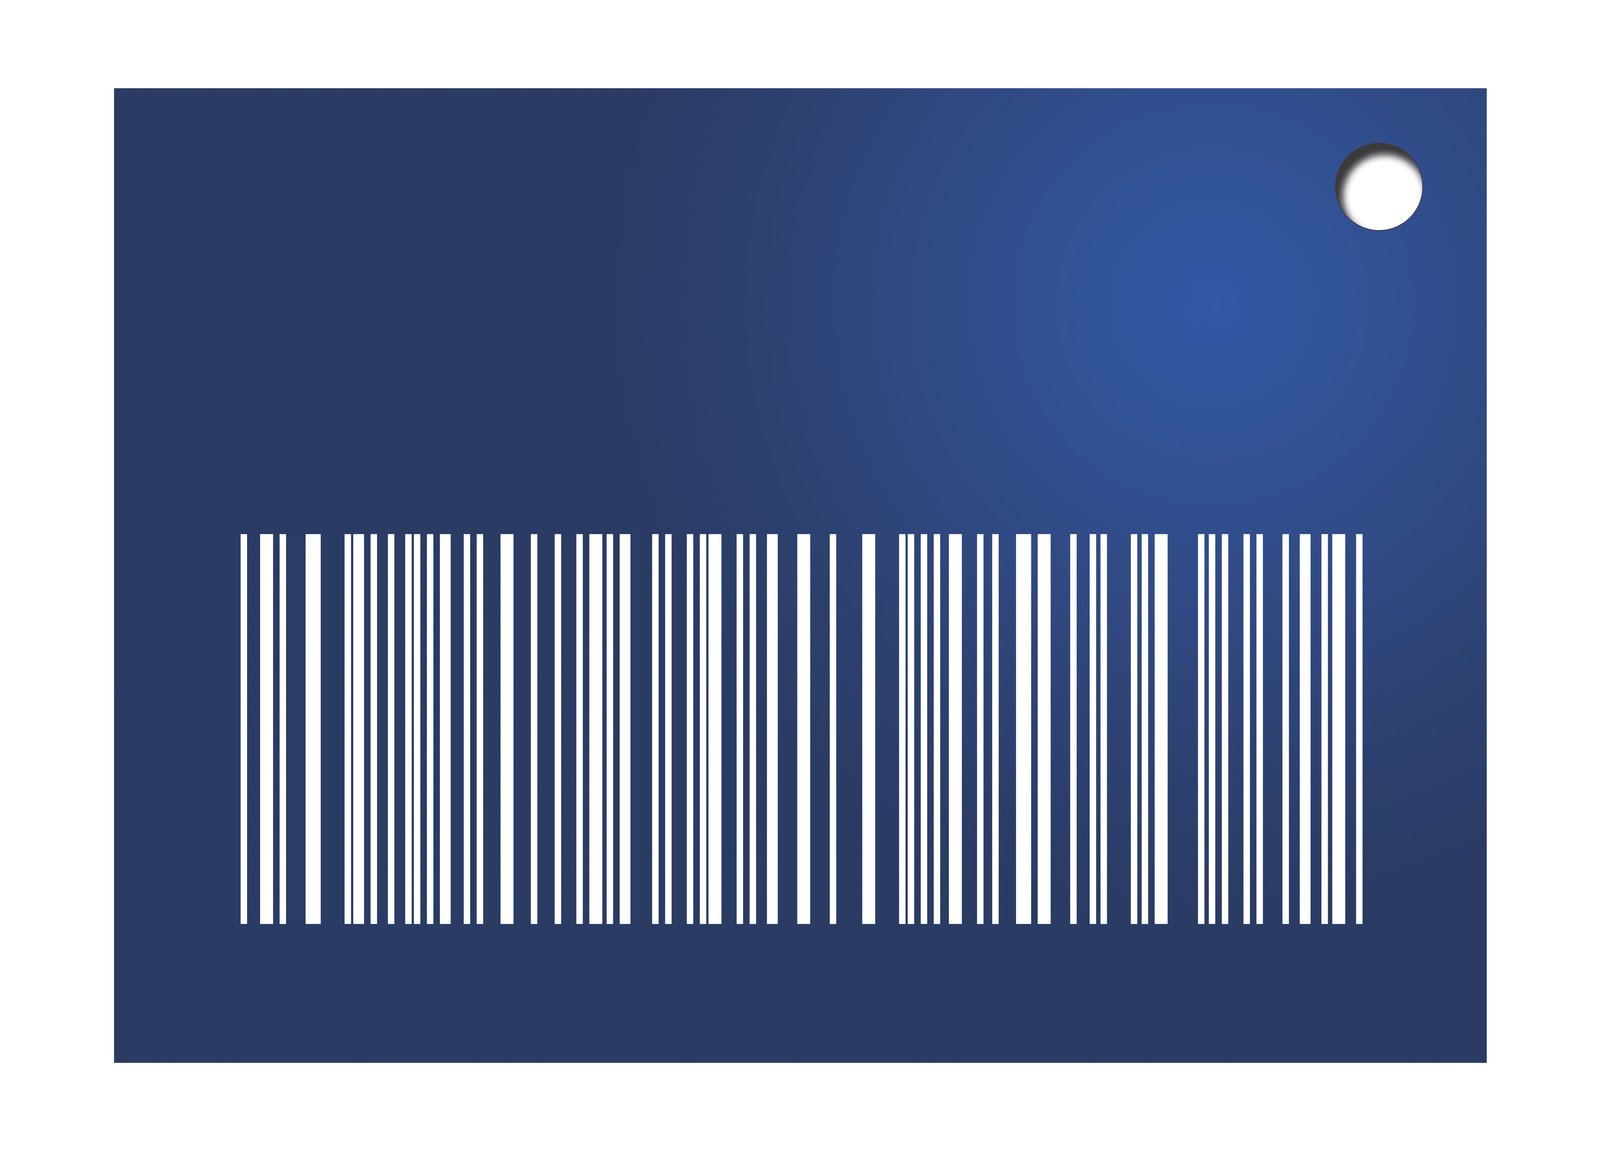 the barcode and a disk are in the middle of the image